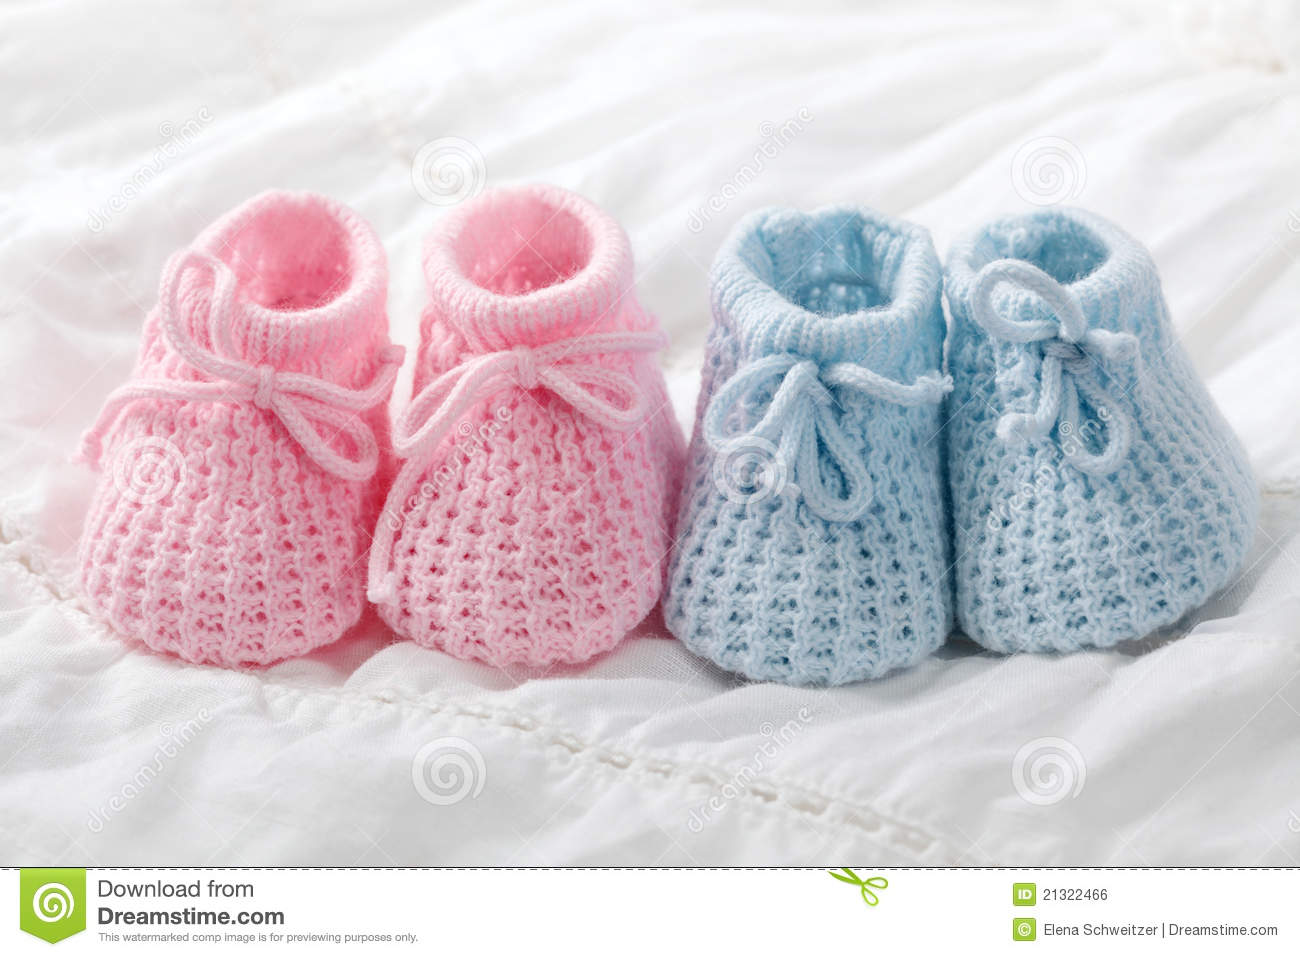 Blue And Pink Baby Booties Royalty Free Stock Image   Image  21322466